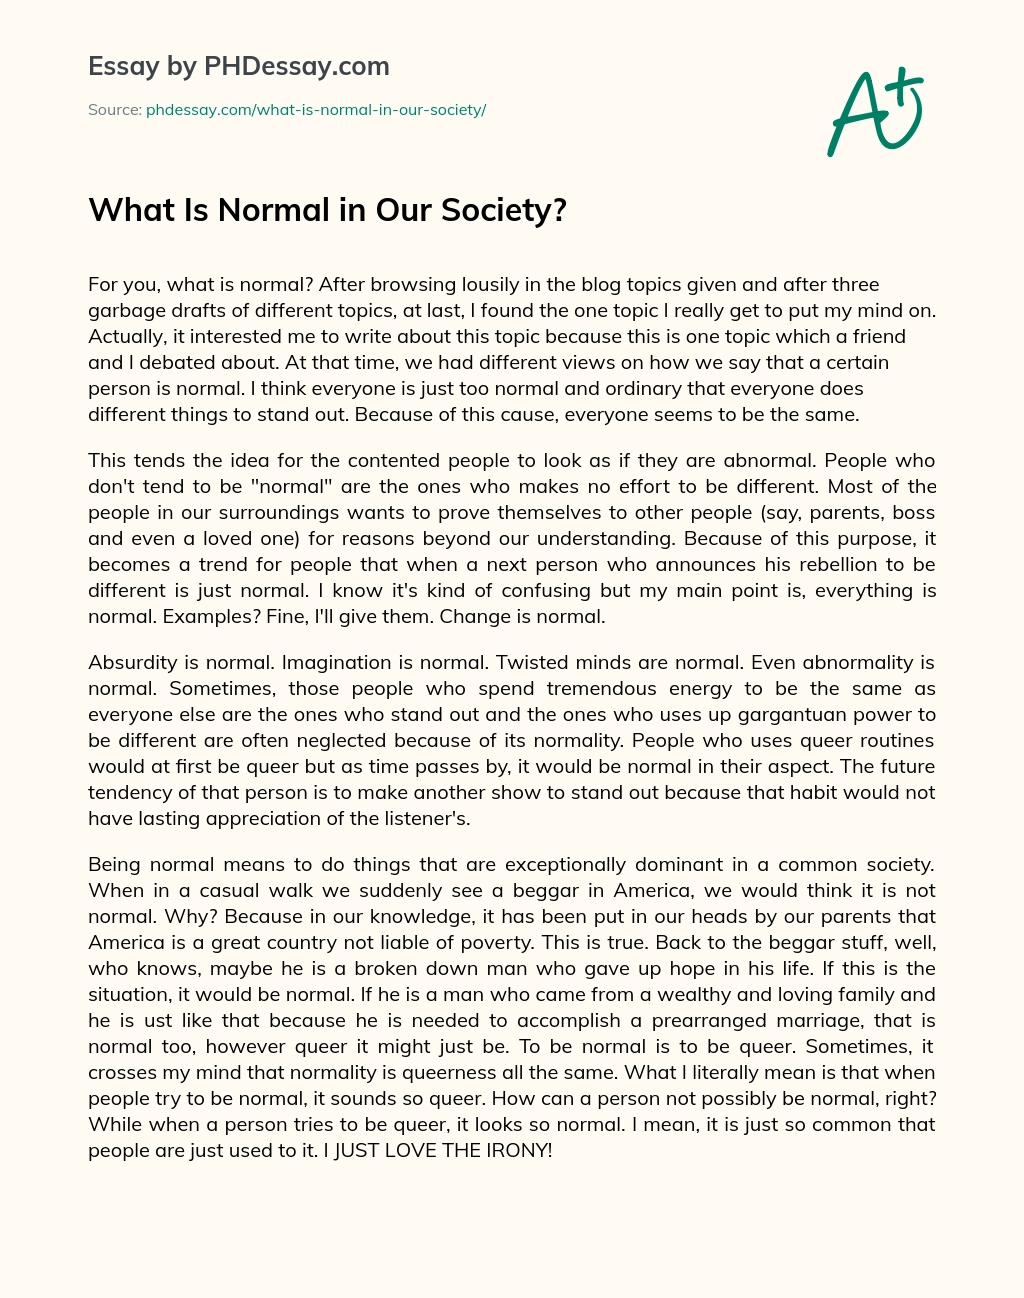 What Is Normal in Our Society? essay